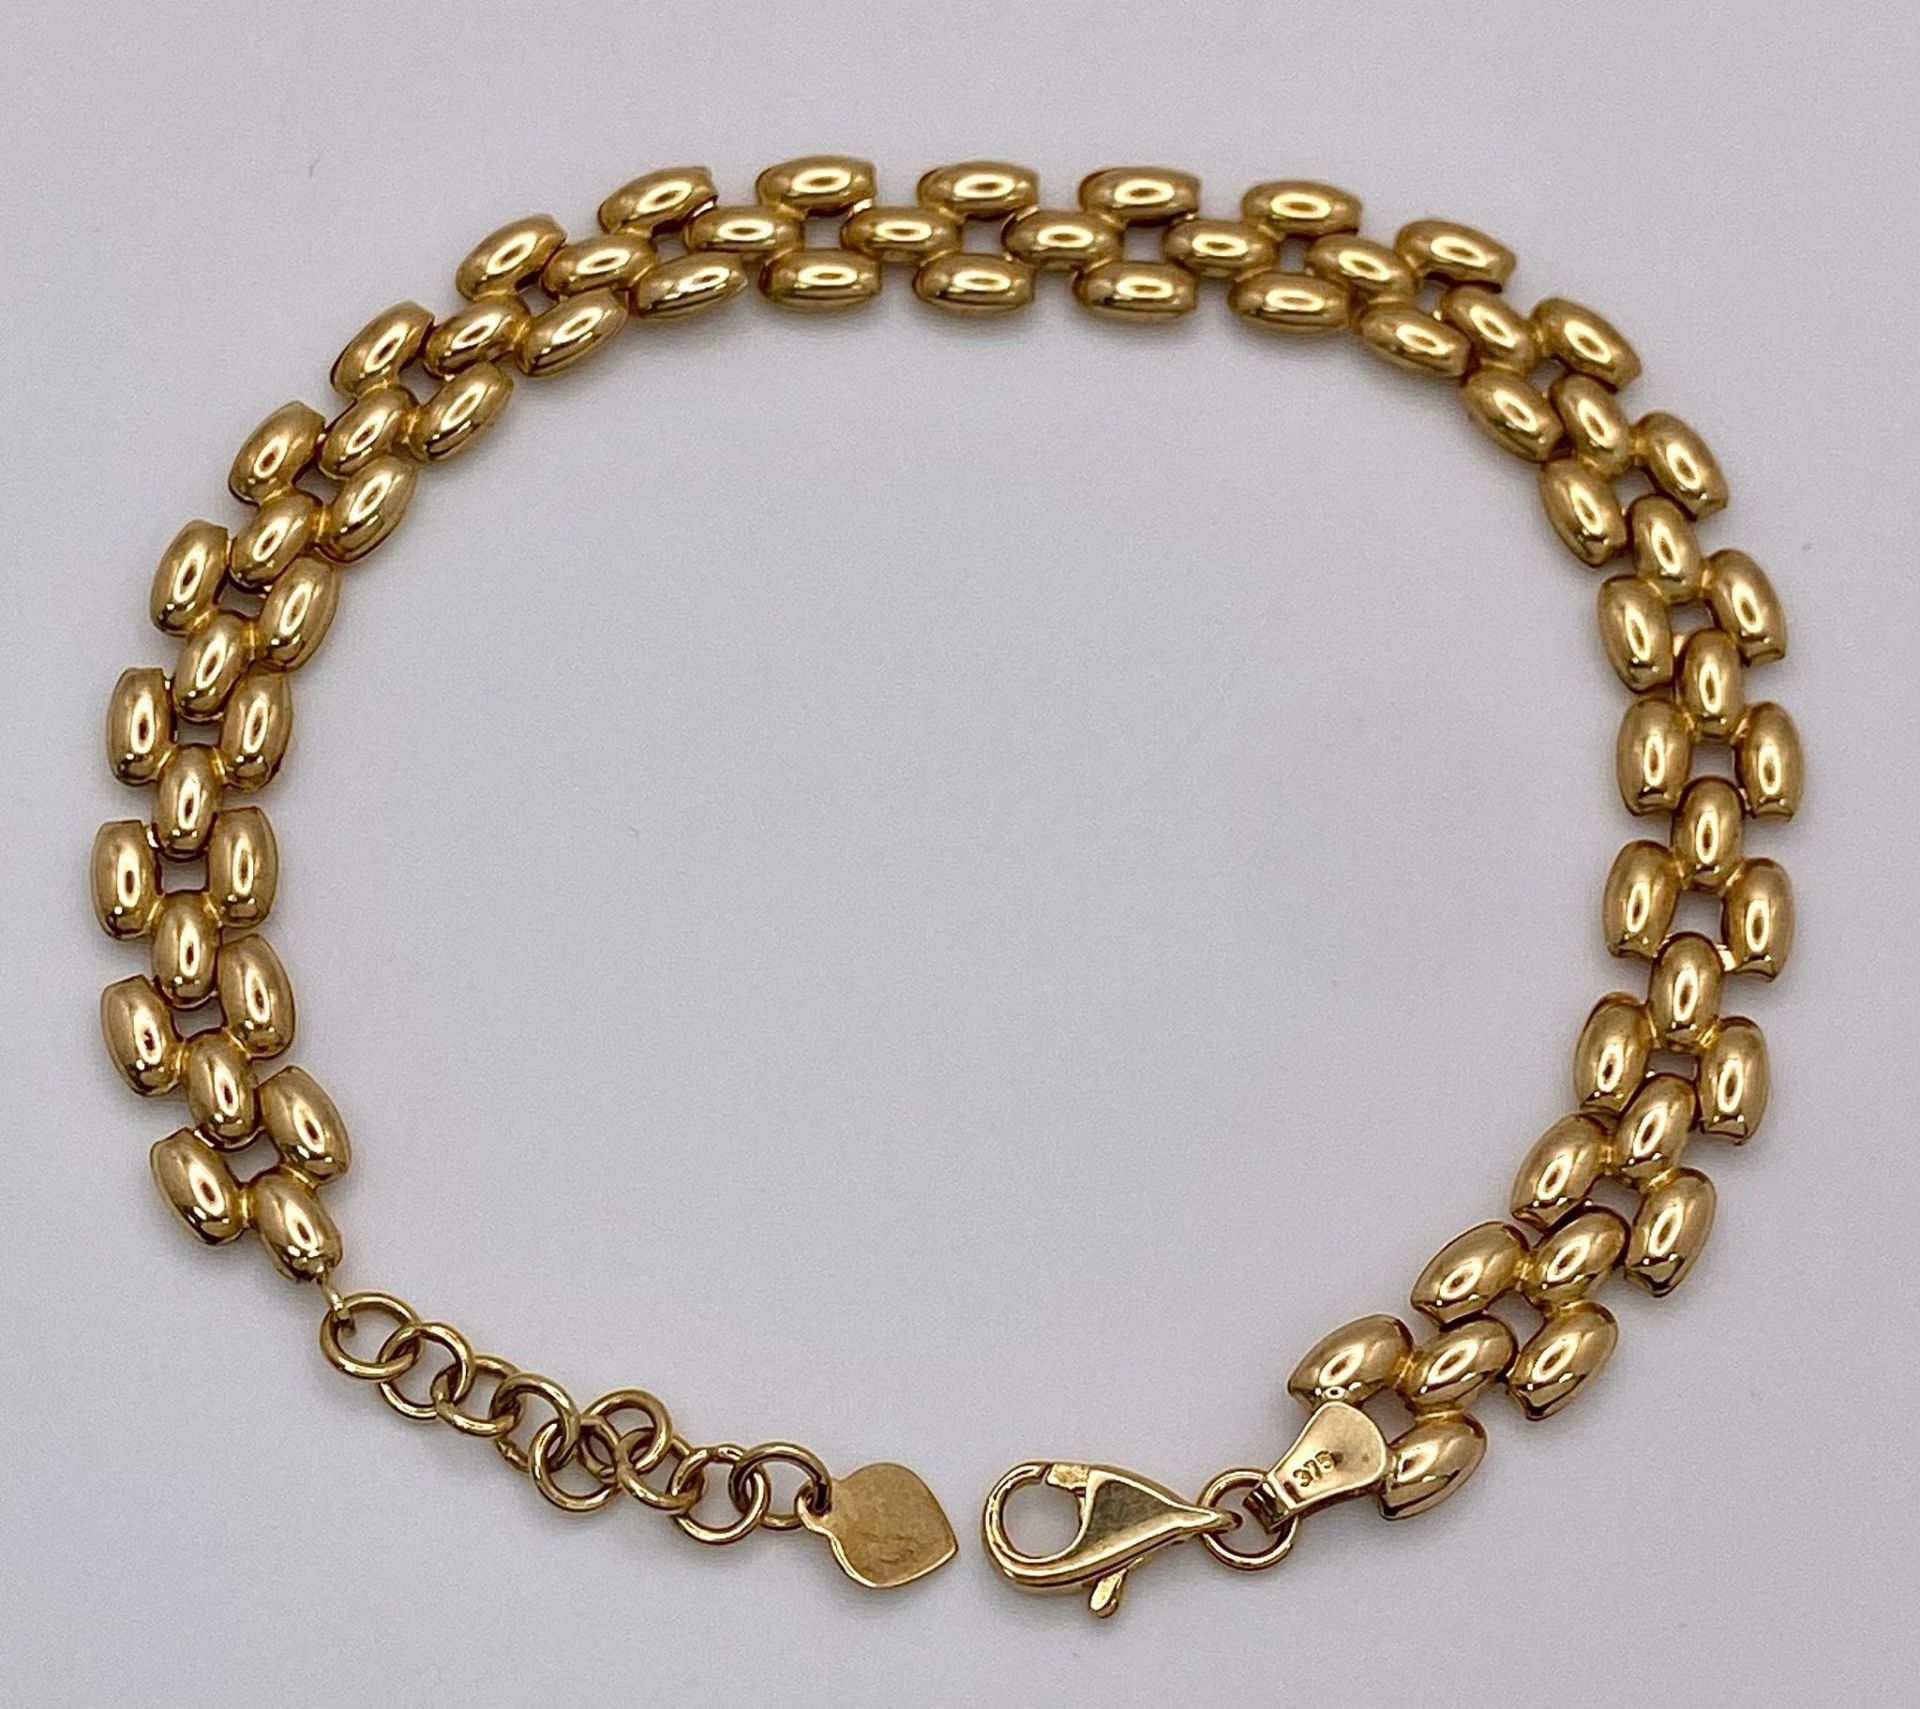 A 9K Yellow Gold Three-Row Link Bracelet. 18cm. 4.5g weight - Image 3 of 4